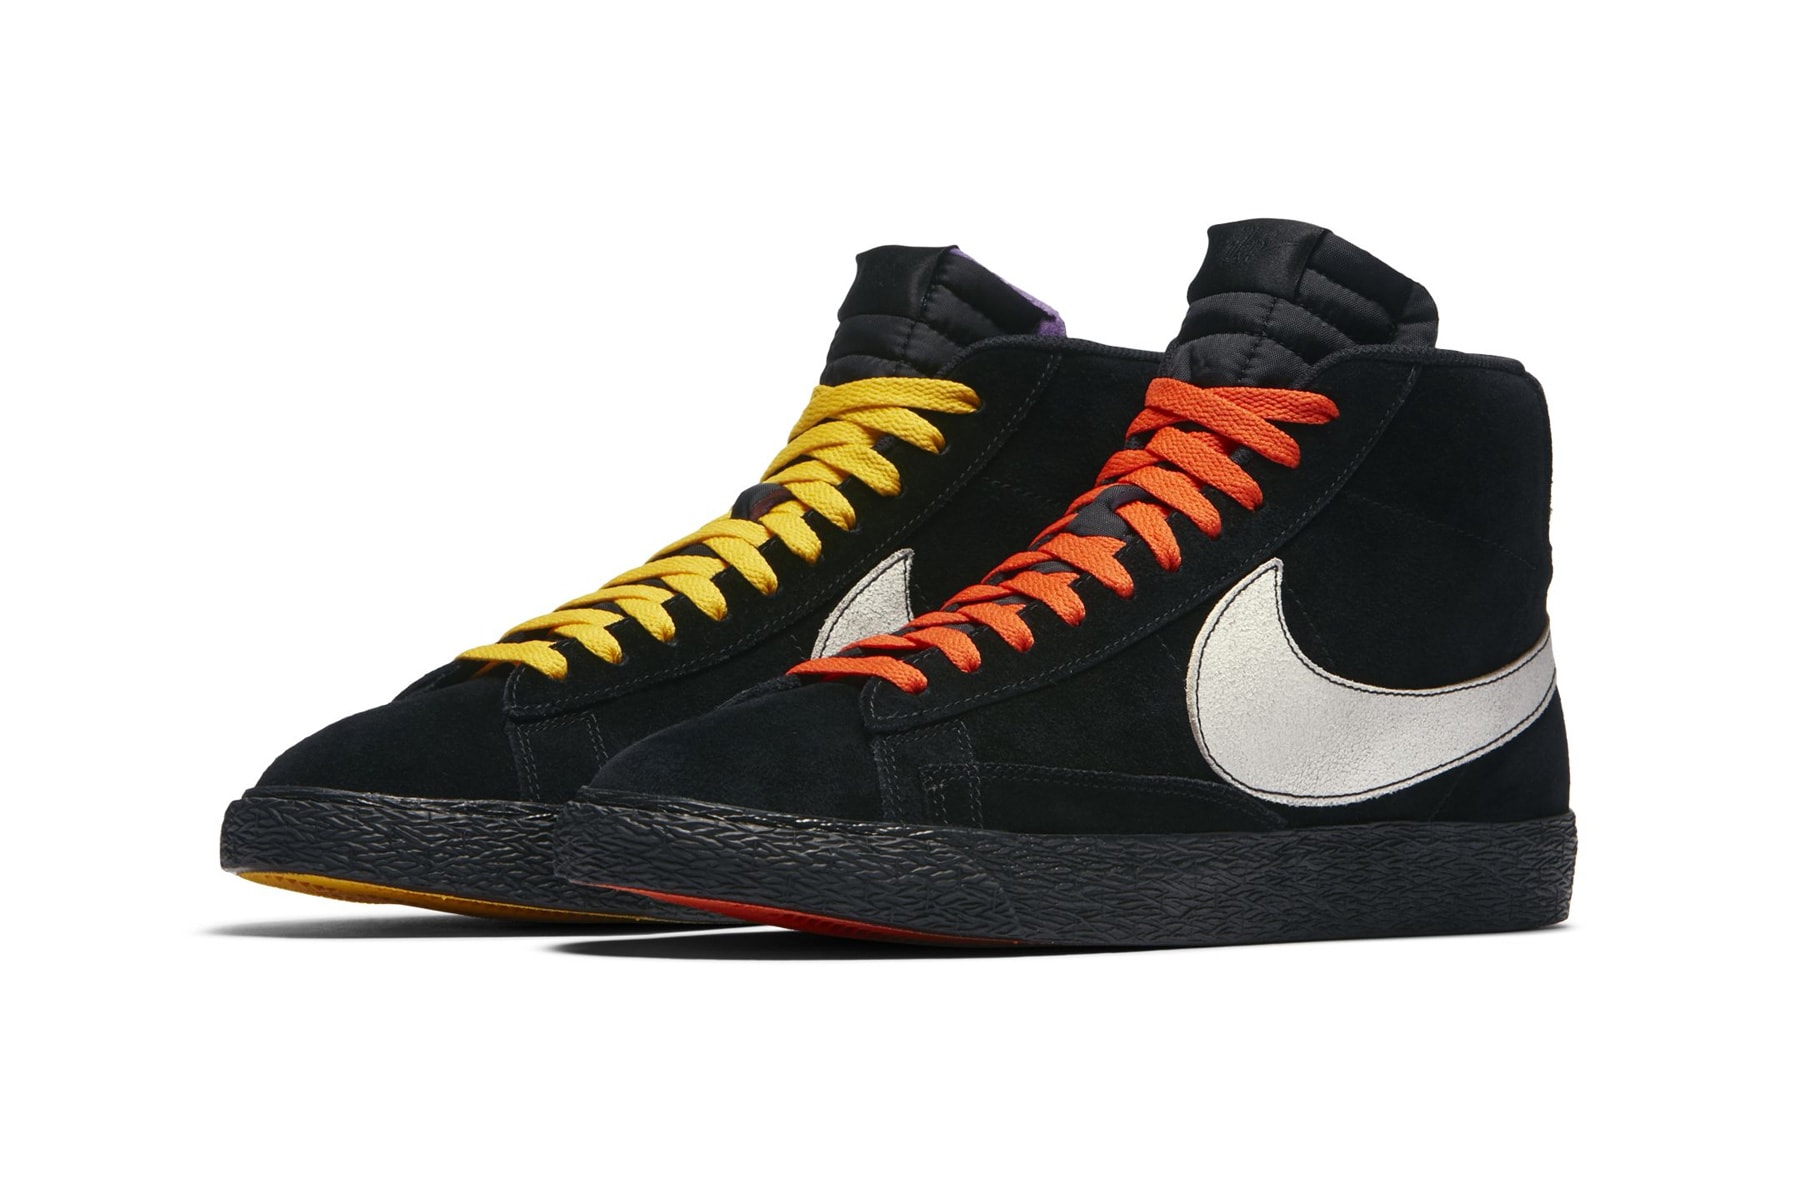 Nike Blazer Mid LA Lakers vs. NY Knicks los angeles new york nba colorway mismatched sneaker release date info price purchase